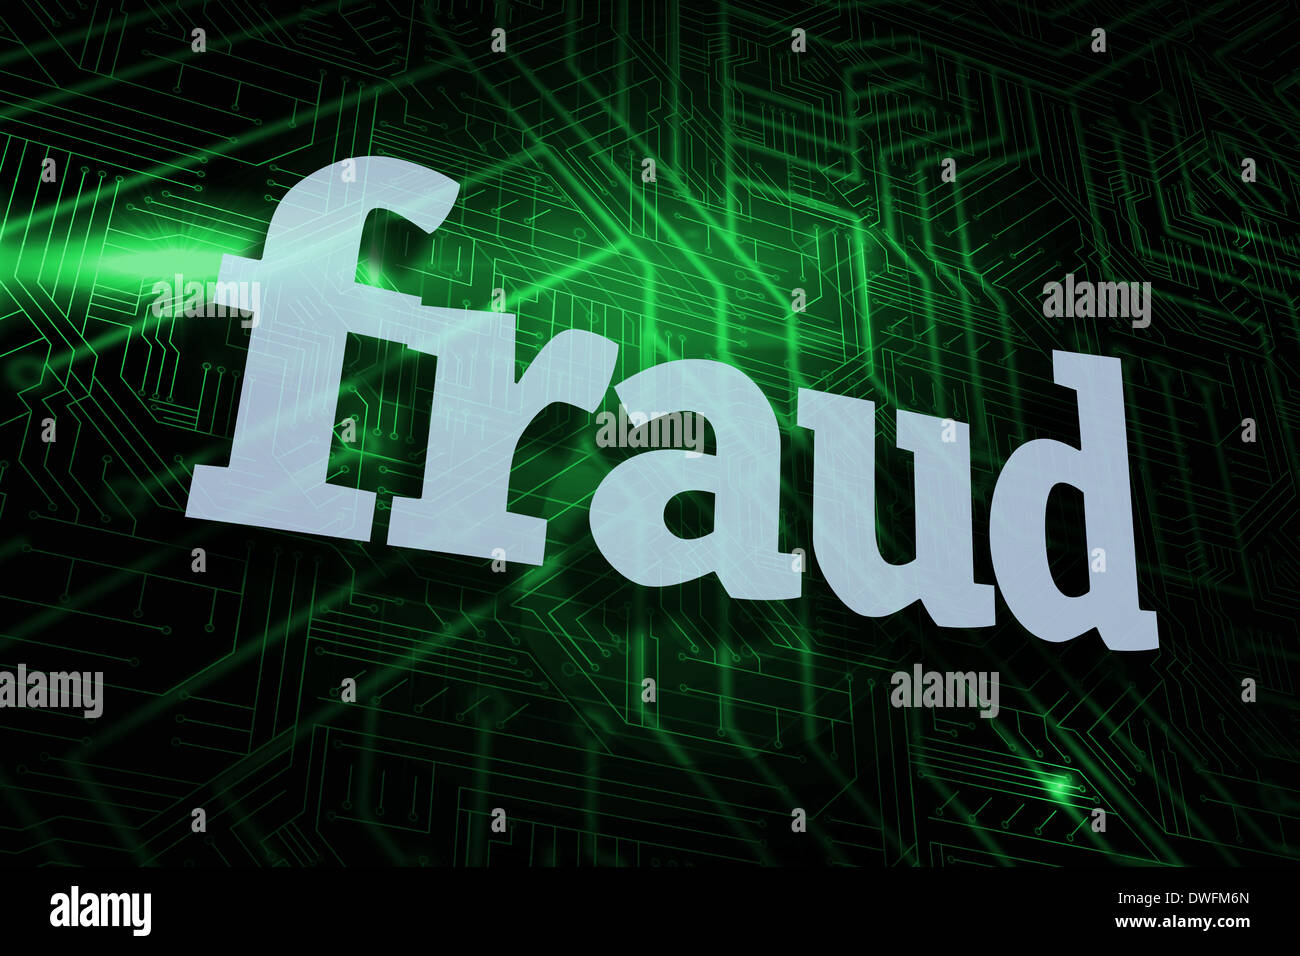 Fraud against green and black circuit board Stock Photo